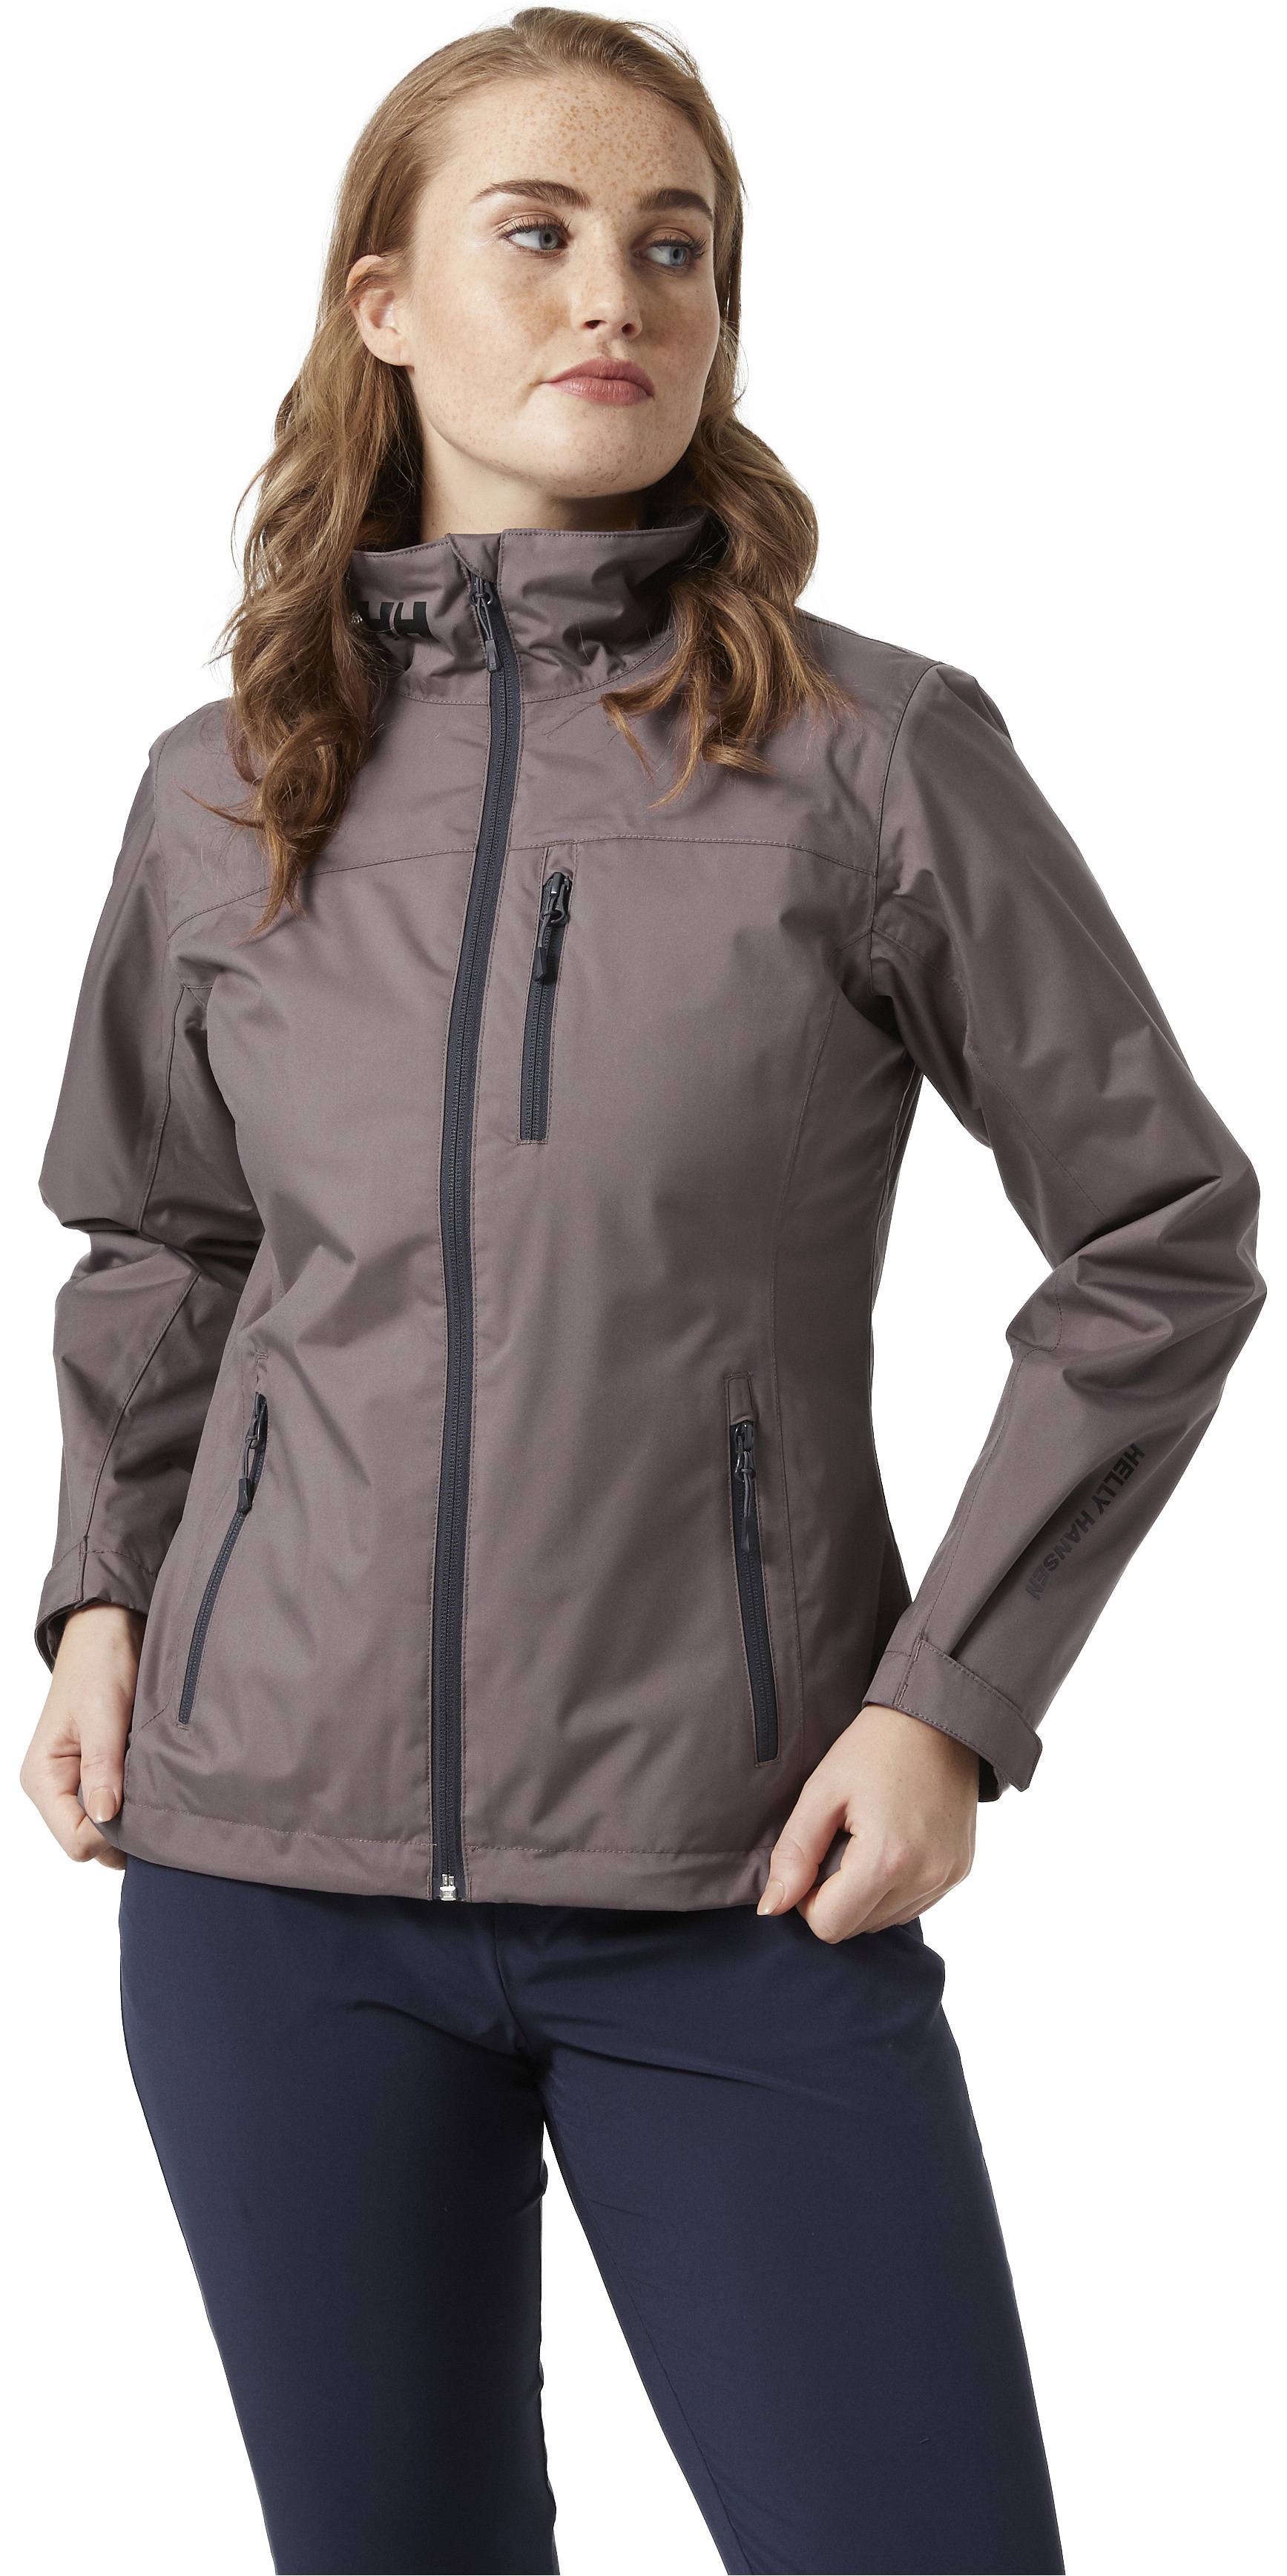 2021 Helly Hansen Crew Midlayer Jacket 30317 - Sparrow Grey - Sailing | Wetsuit Outlet